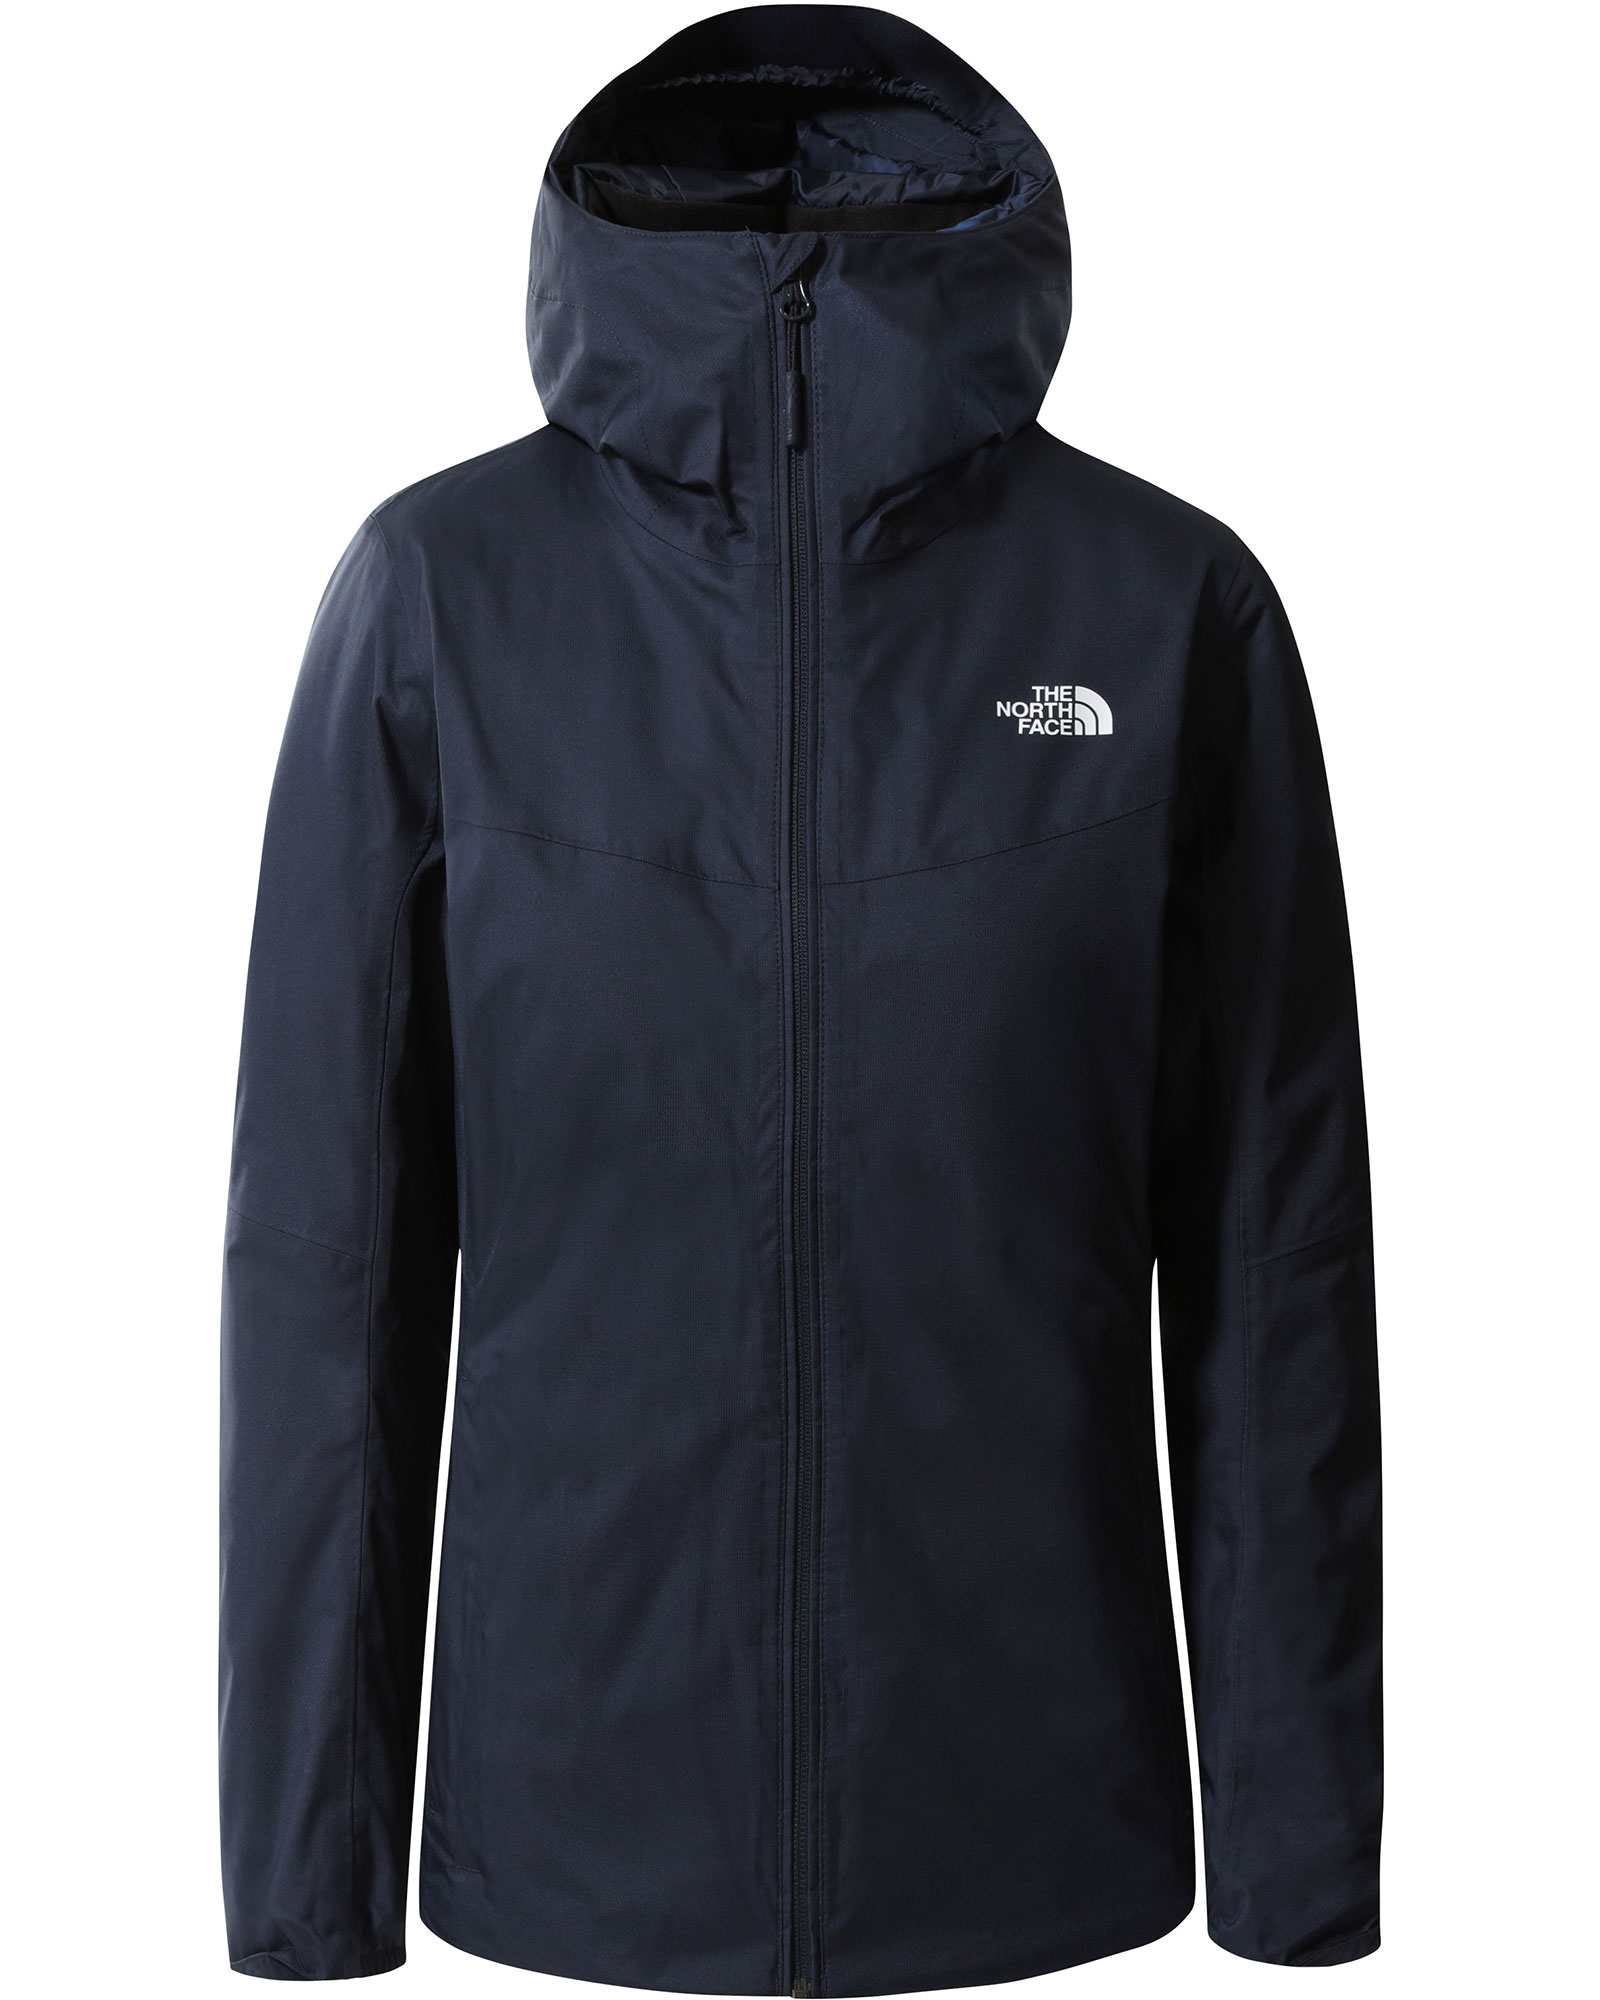 The North Face Quest DryVent Women’s Insulated Jacket - Urban Navy S